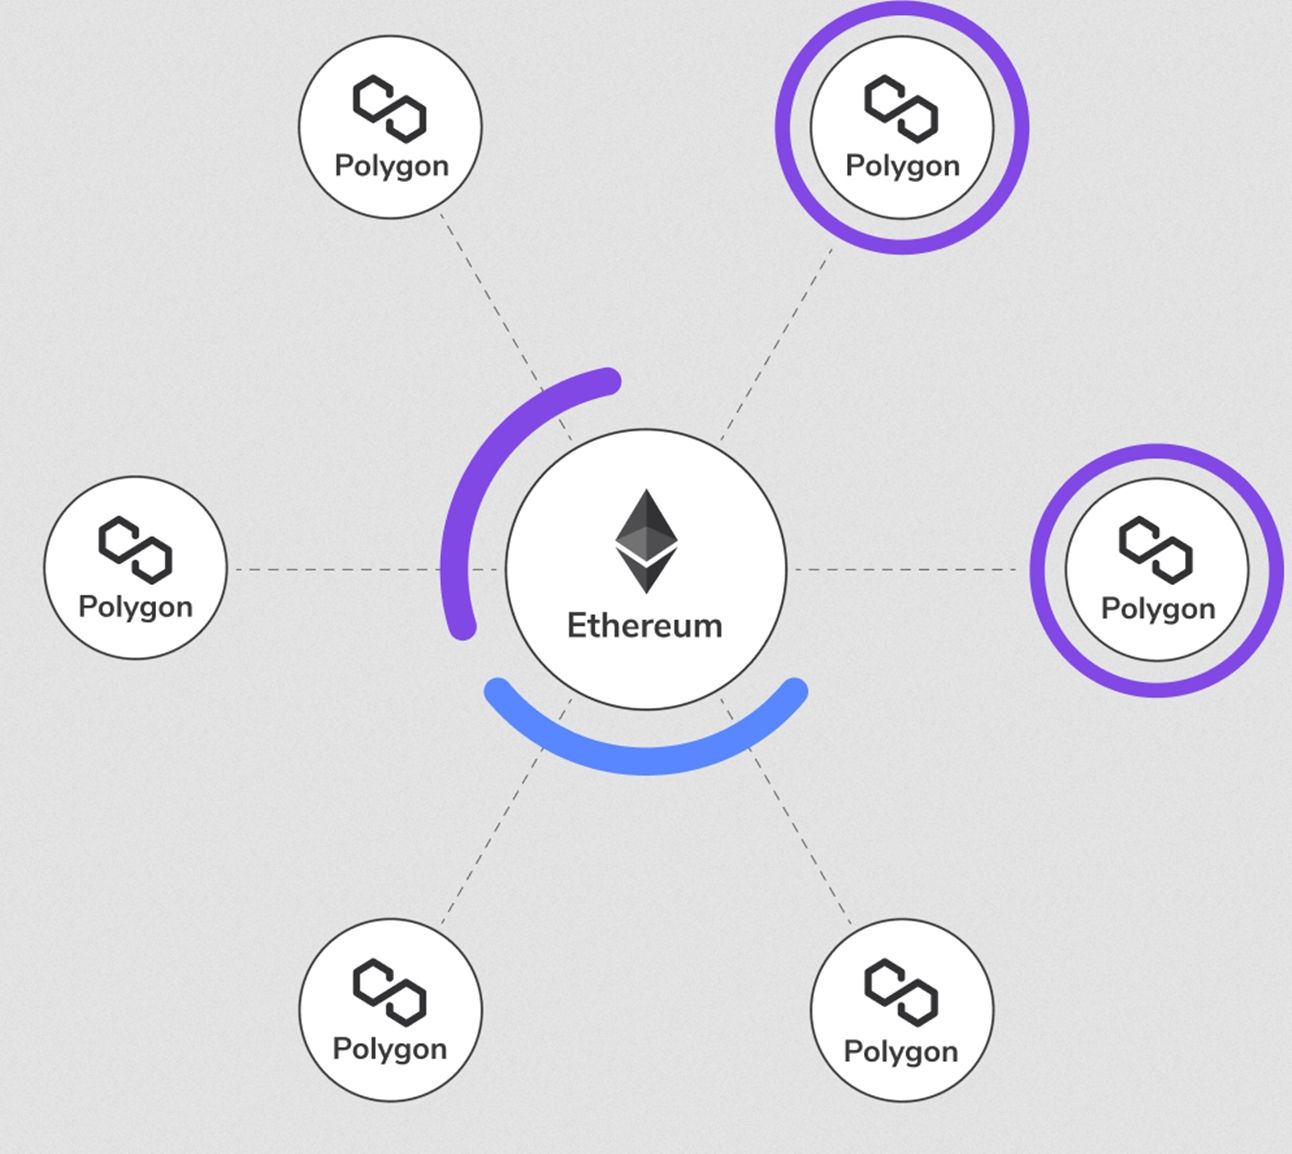 Illustration of the Polygon network relative to the Ethereum chain.